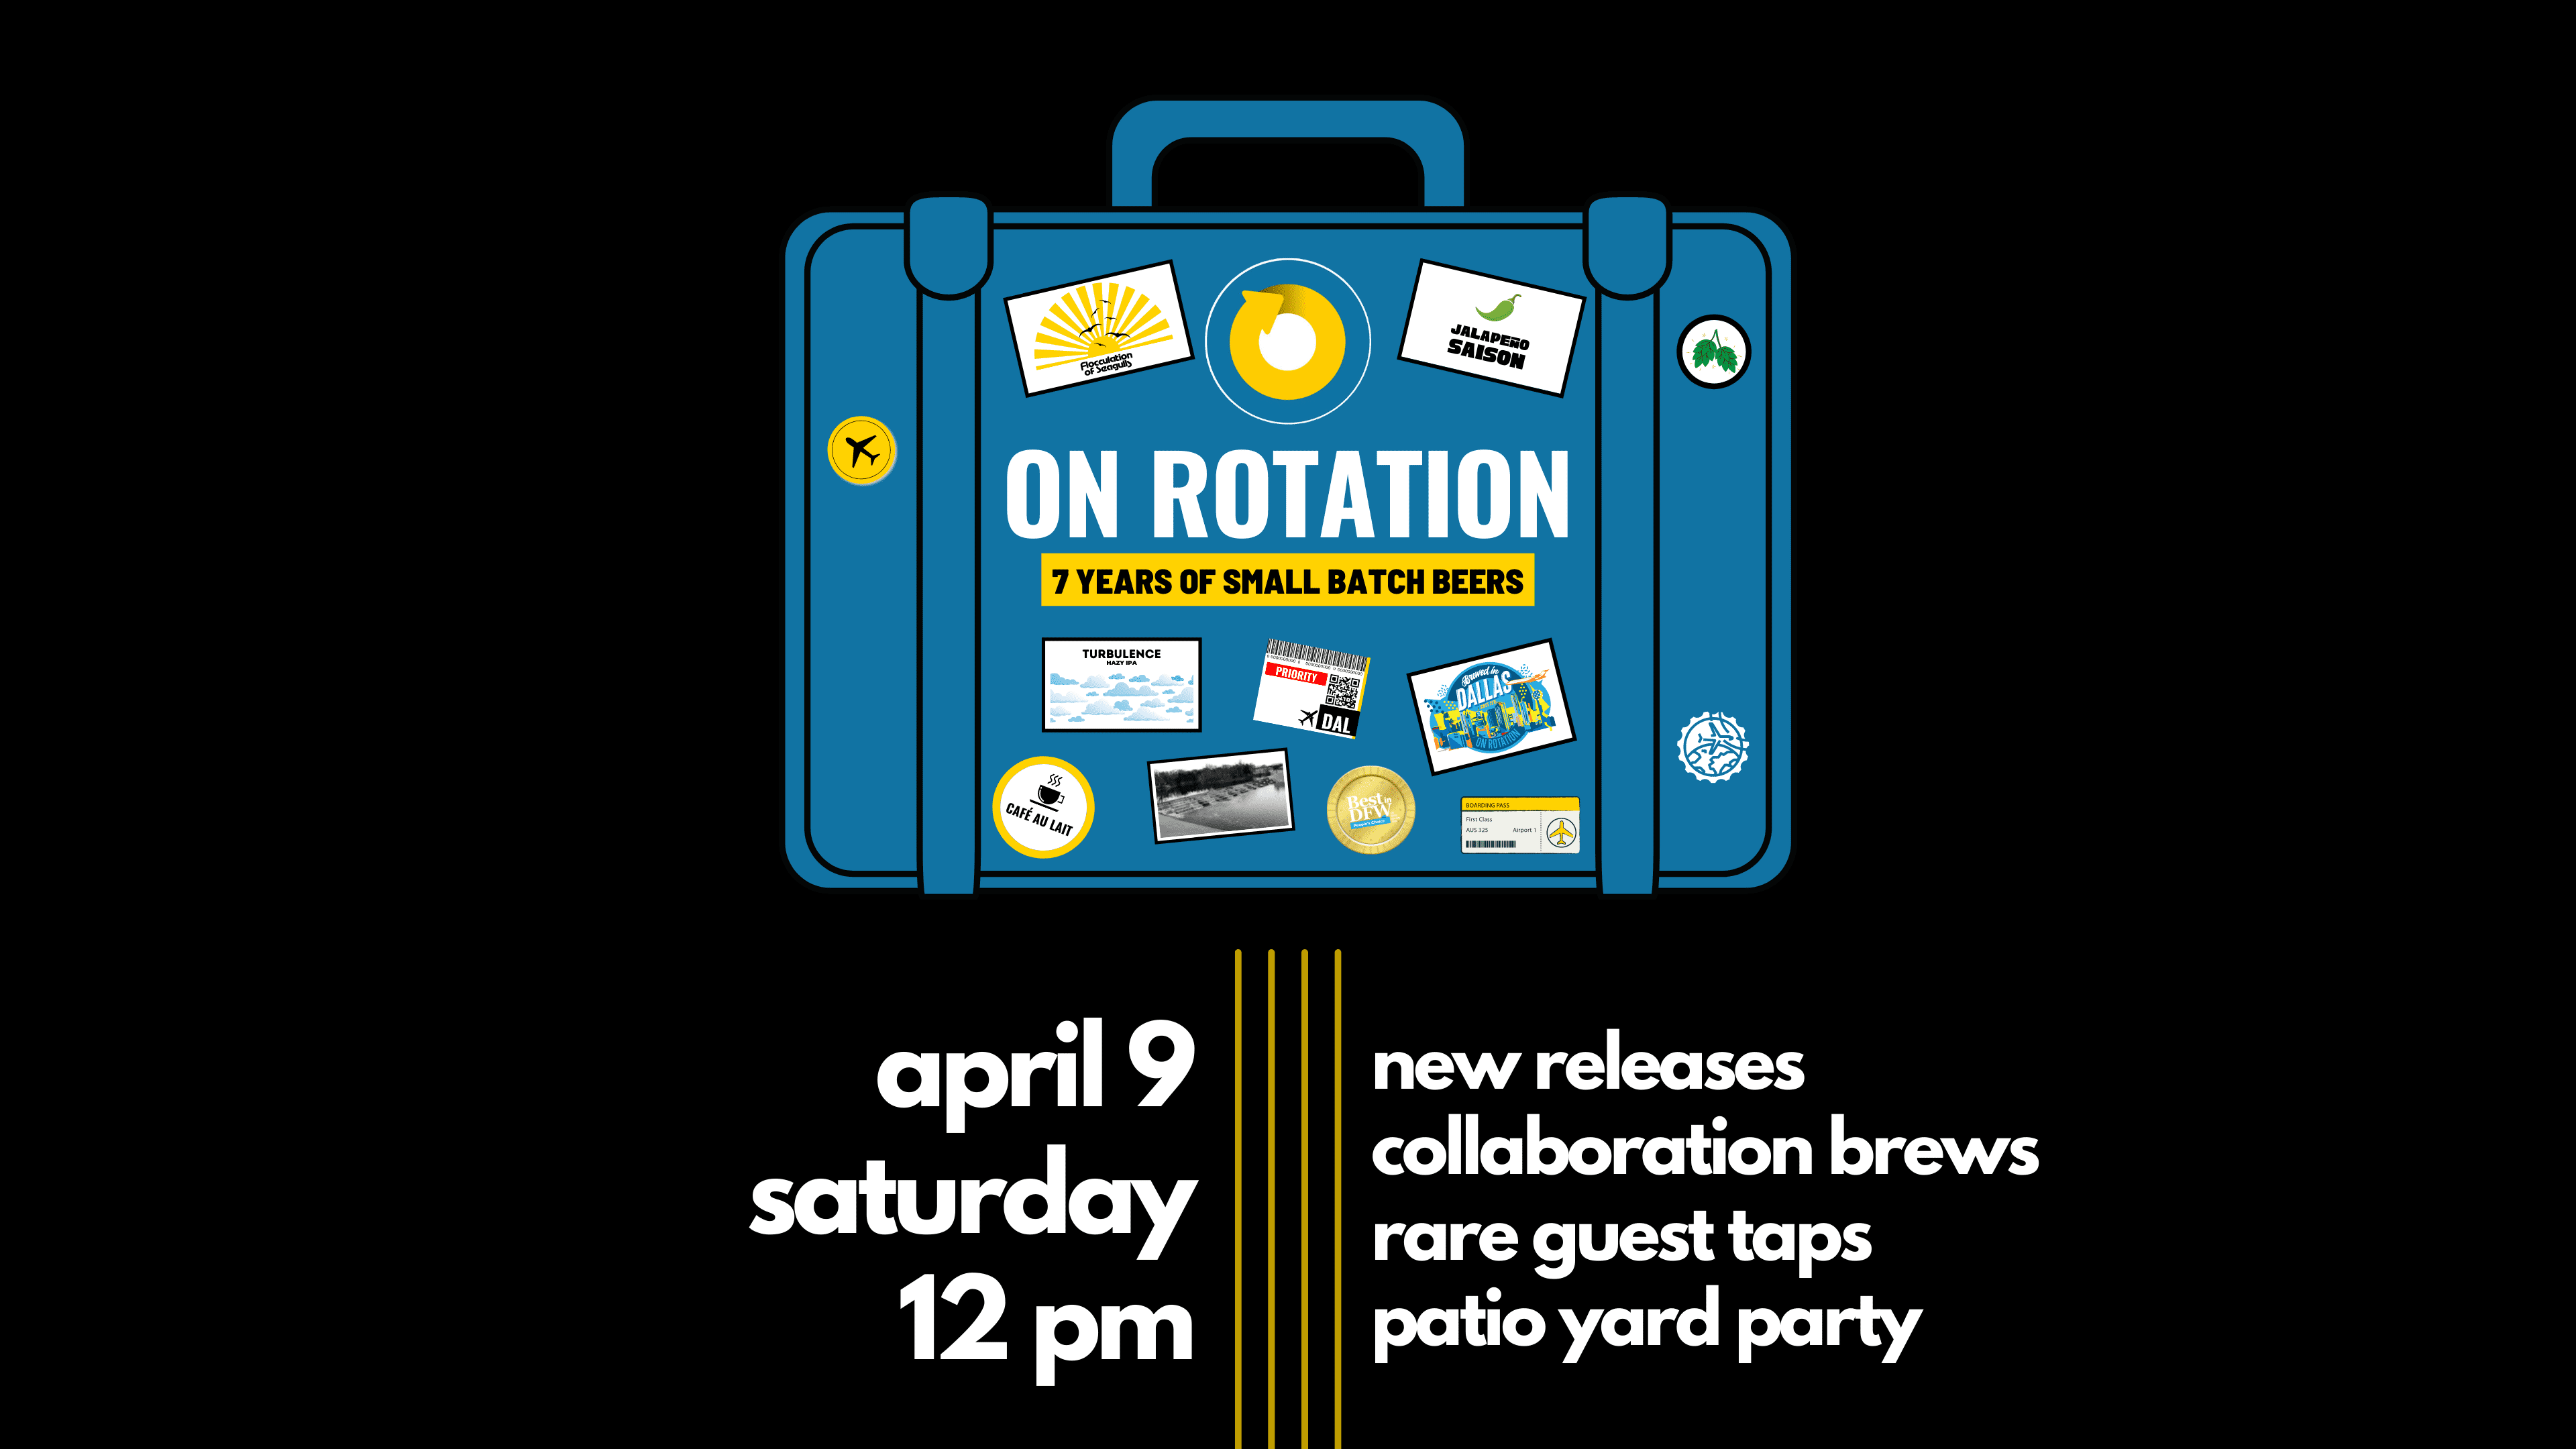 On Rotation 7 Year Anniversary - April 9